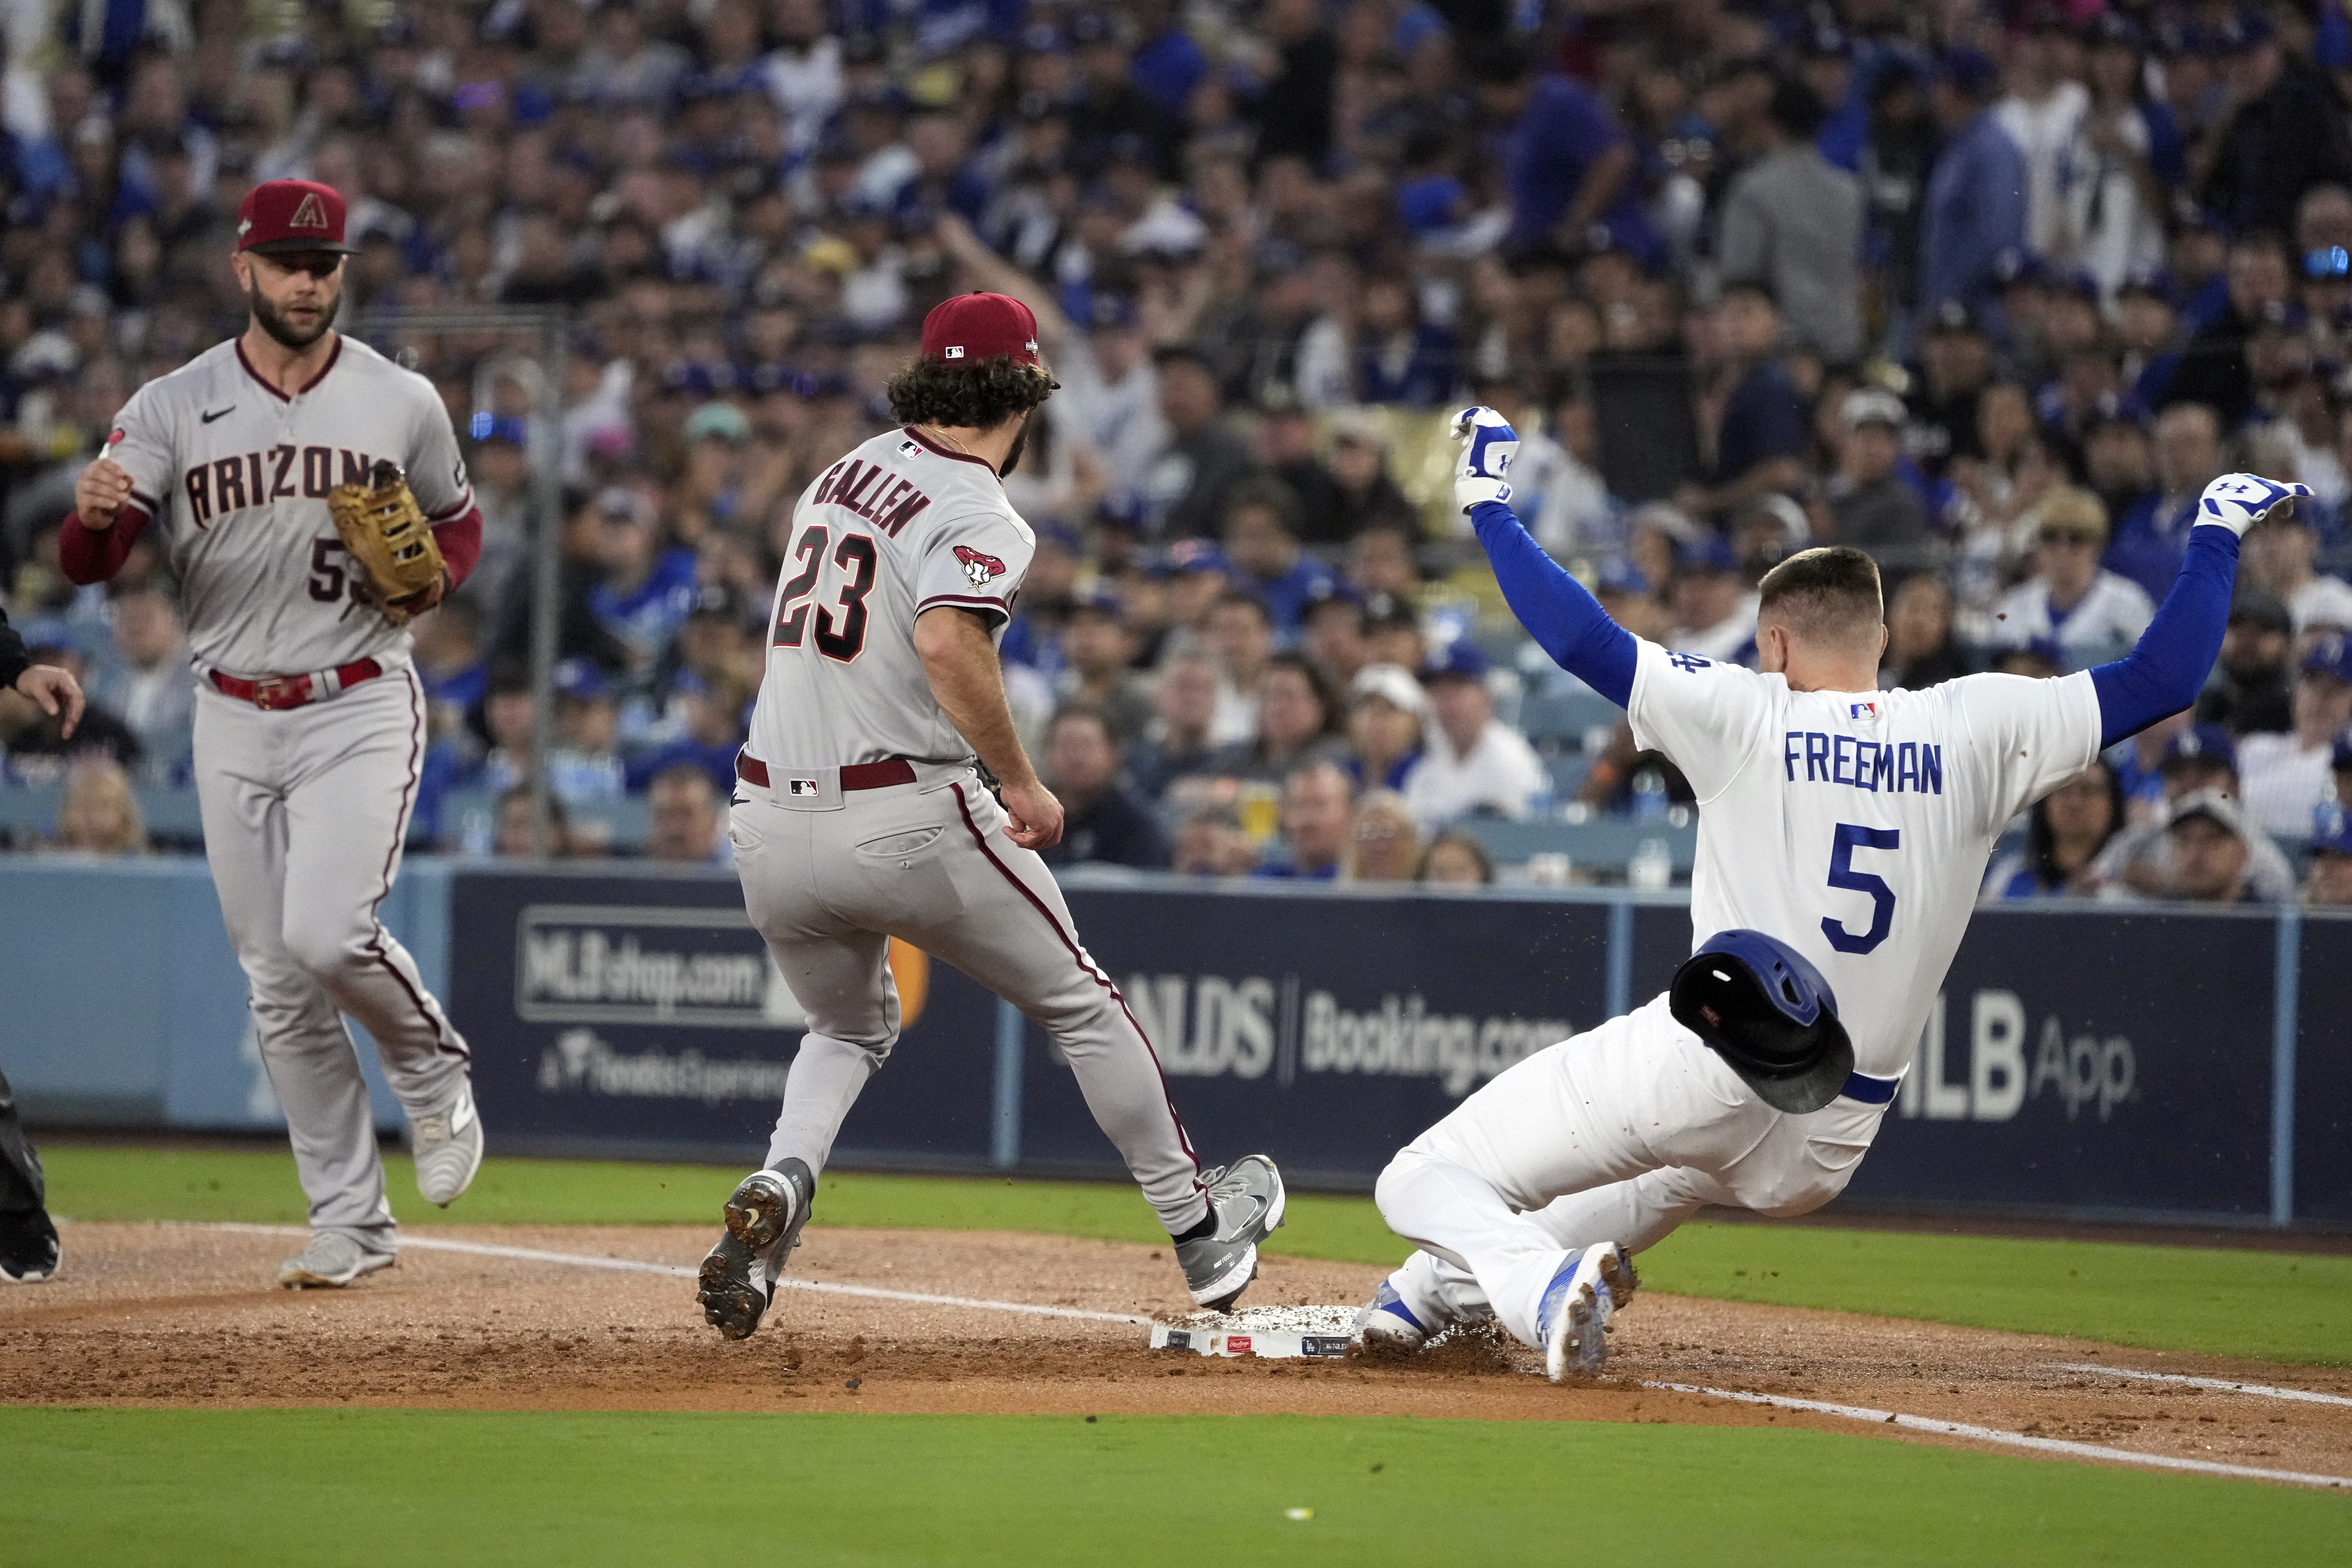 How to Watch the MLB Playoffs today: October 11 - Astros v. Twins, Dodgers v.  D-backs and more